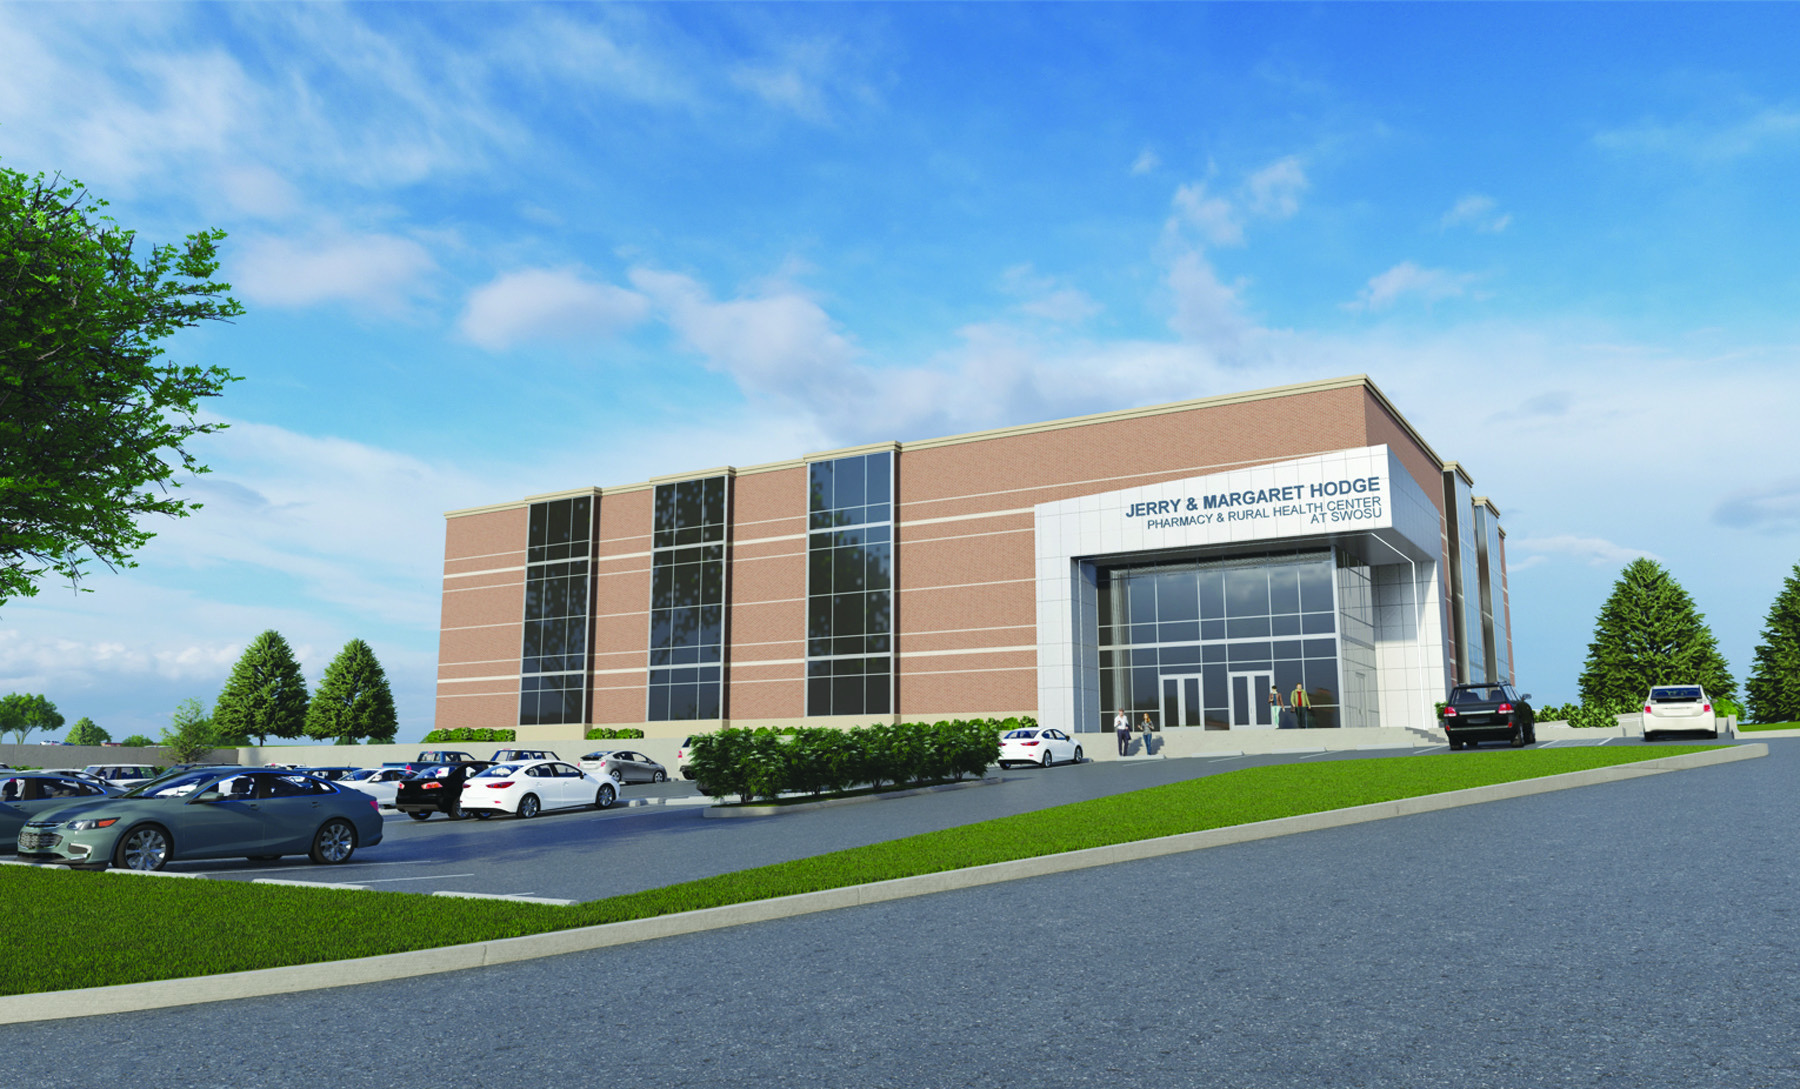 This schematic drawing shows what the new Jerry and Margaret Hodge Pharmacy and Rural Healthcare building on SWOSU’s campus could look like. Provided